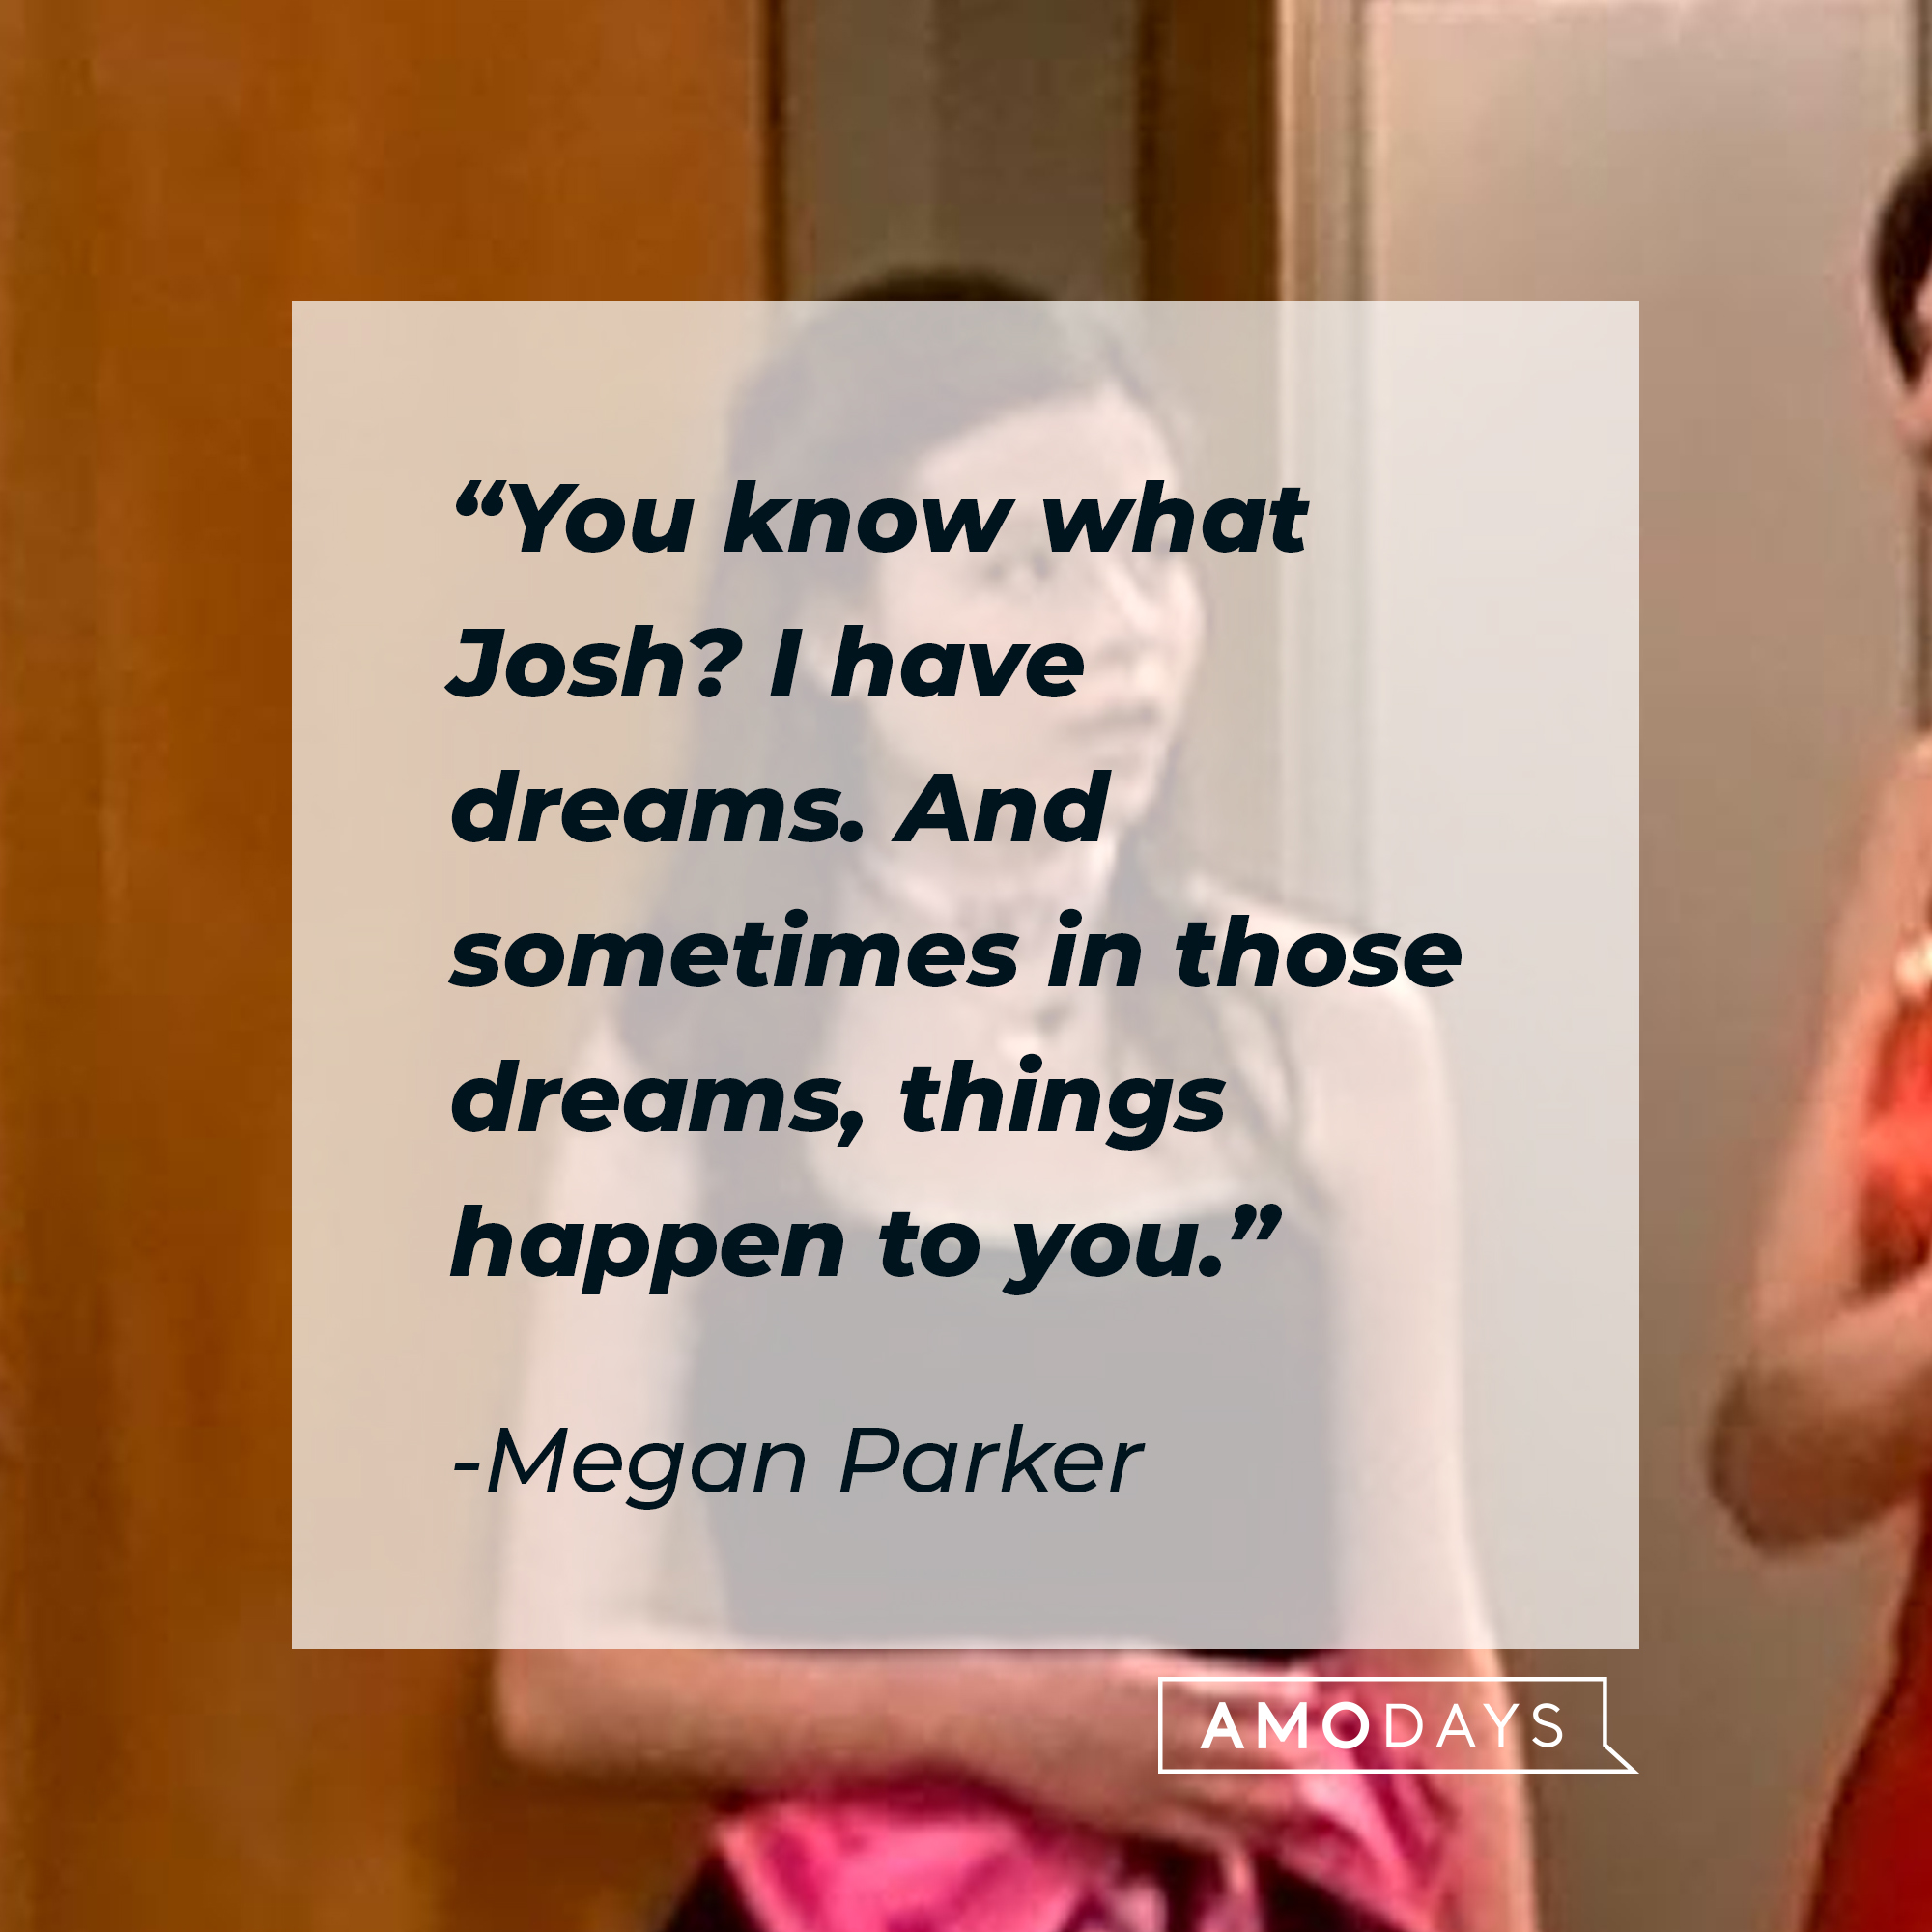 Megan Parker's quote, "You know what Josh? I have dreams. And sometimes in those dreams, things happen to you." | Source: facebook.com/Drake & Josh